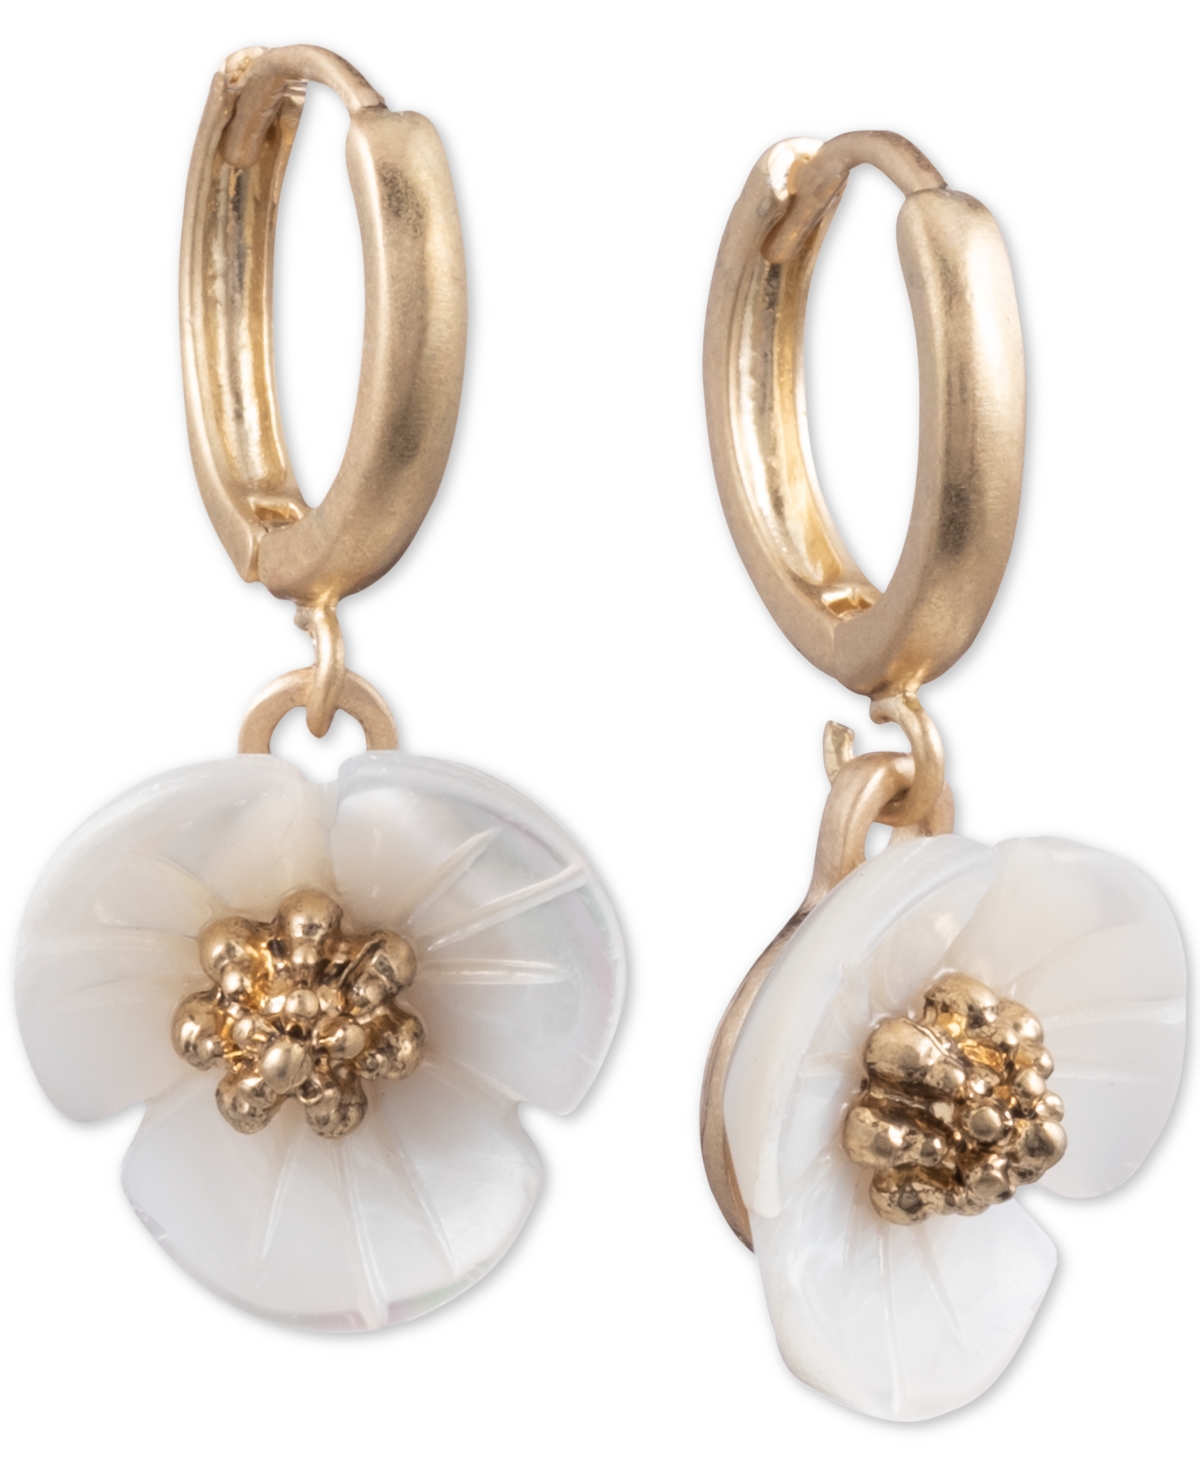 Gold-Tone Imitation Mother-of-Pearl Flower Drop Small Earrings - White